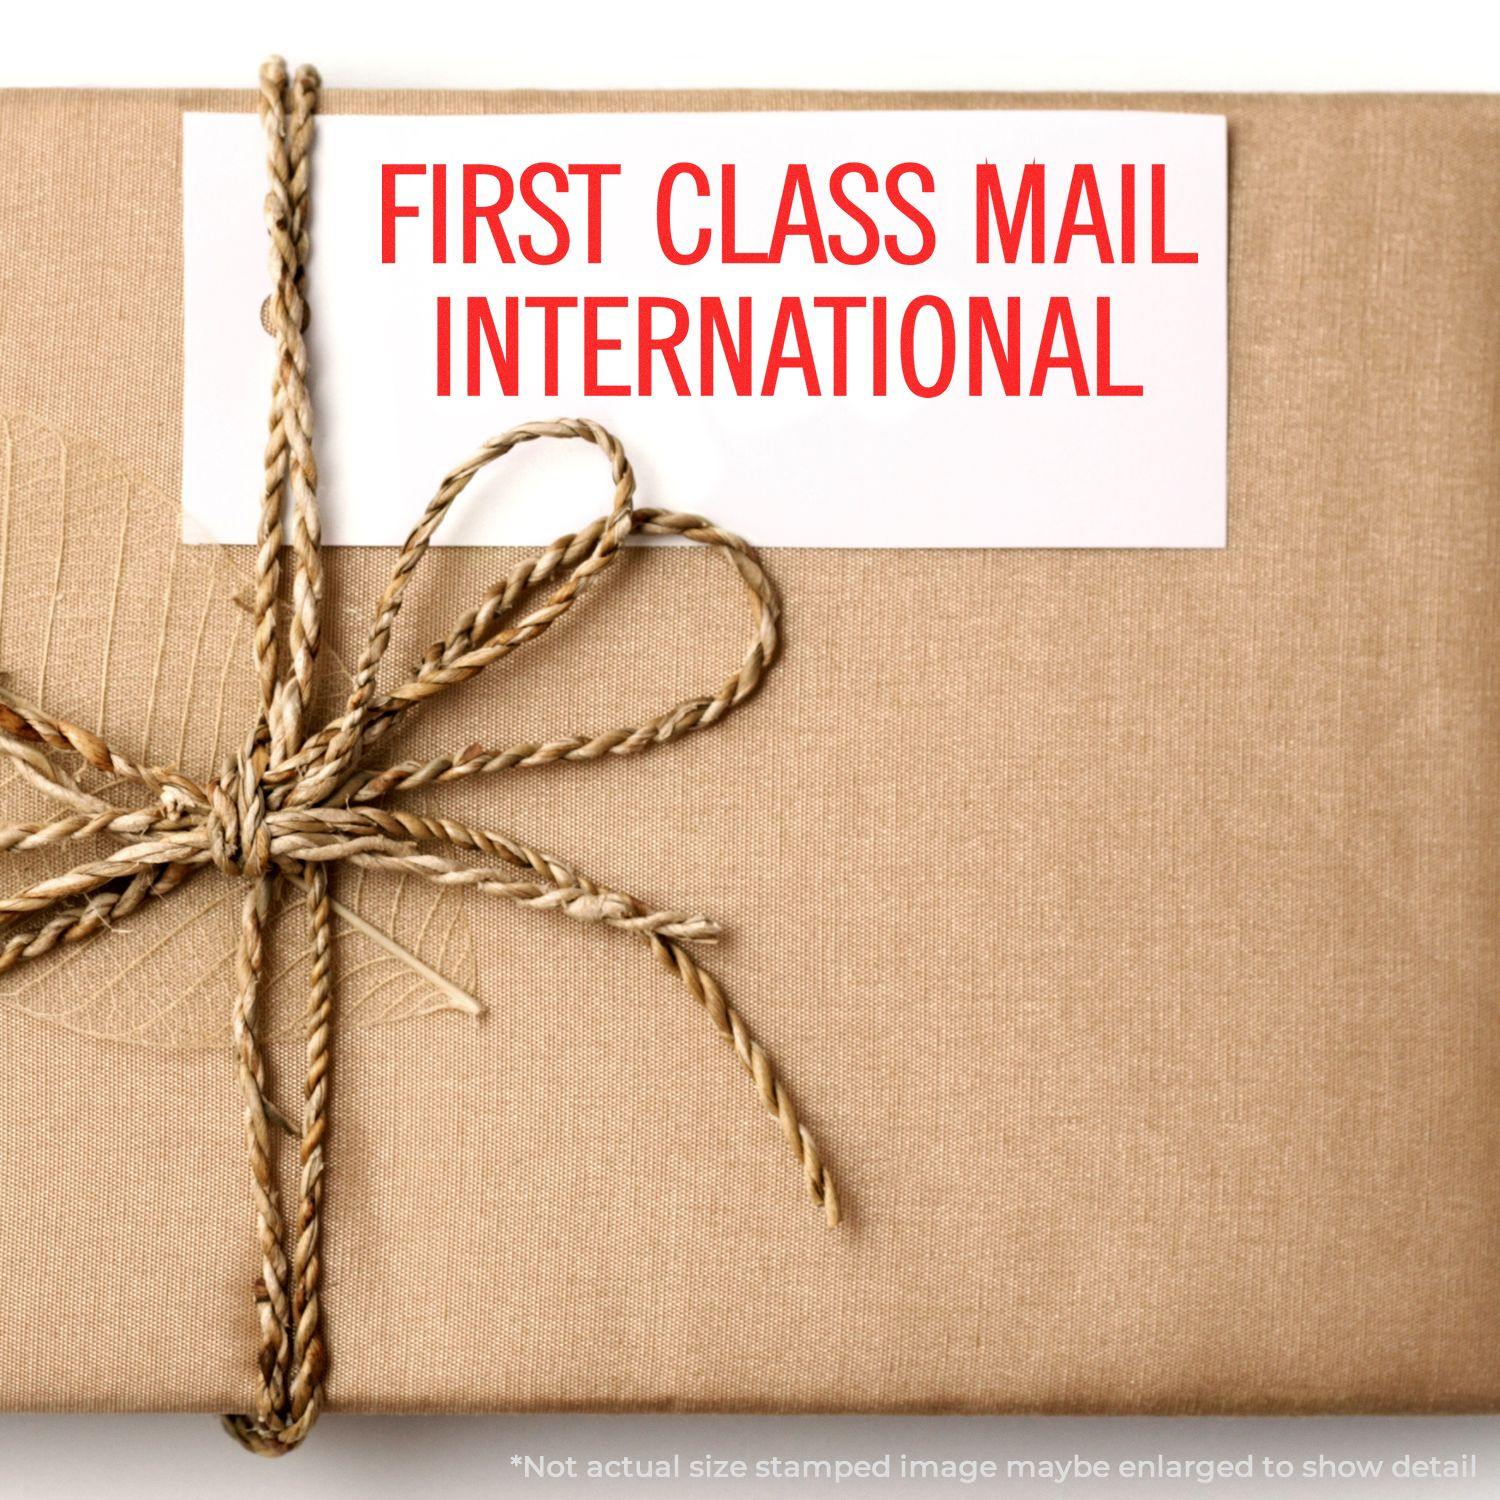 A stock office rubber stamp with a stamped image showing how the text "FIRST CLASS MAIL INTERNATIONAL" is displayed after stamping.